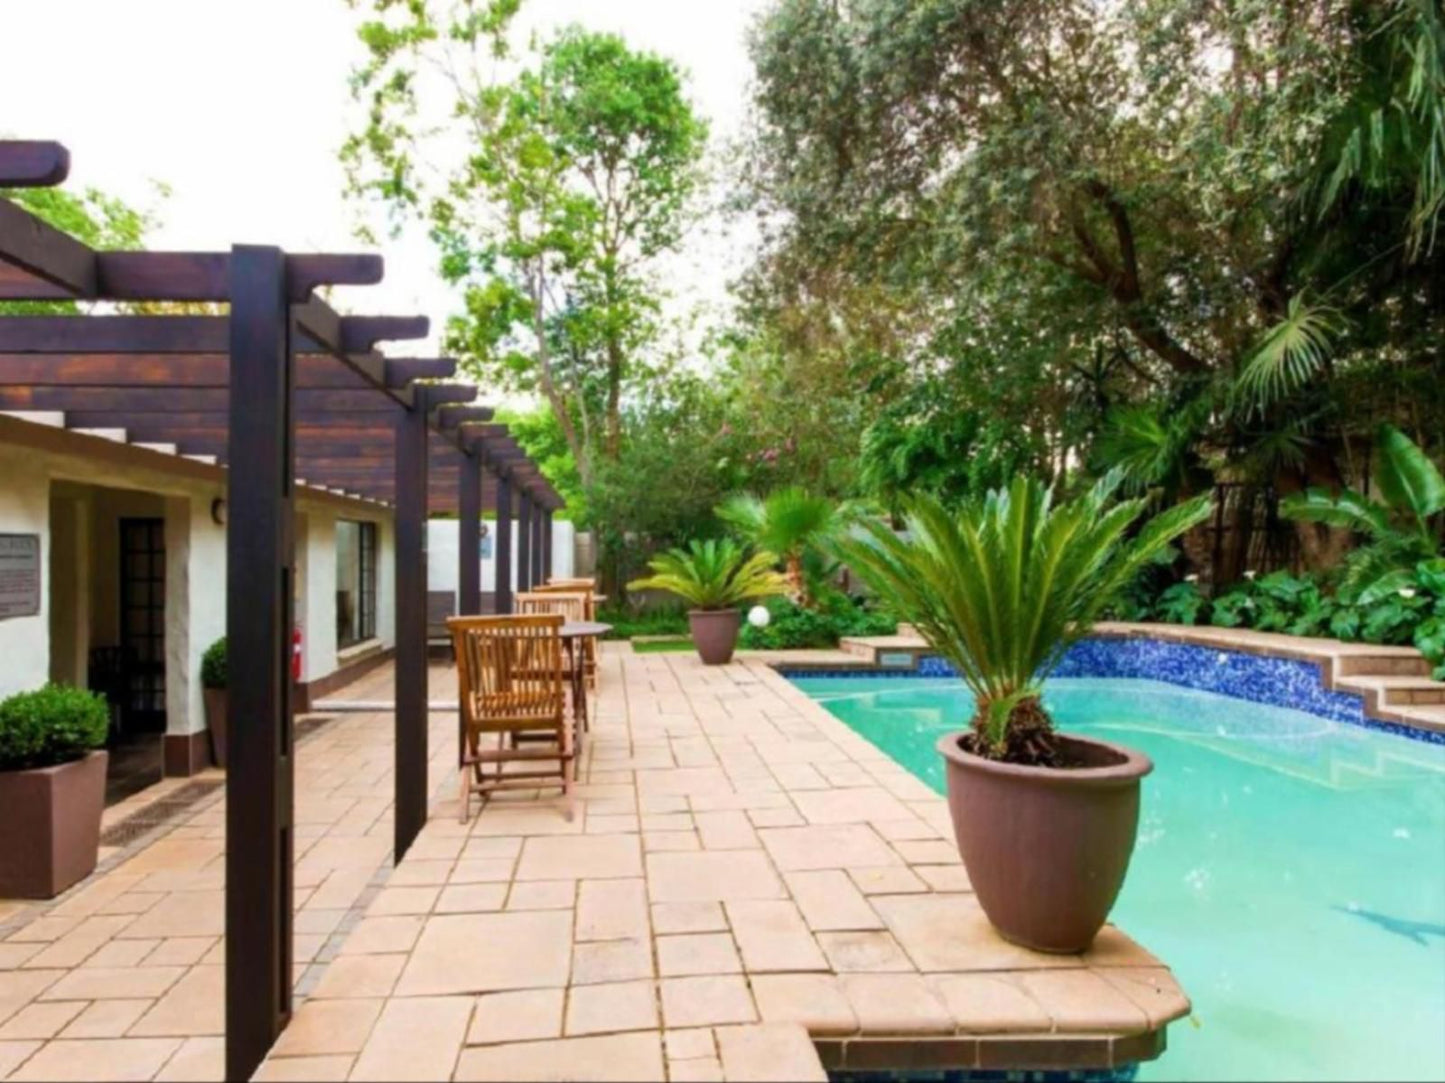 The Villa Guest House Bayswater Bloemfontein Free State South Africa Garden, Nature, Plant, Swimming Pool